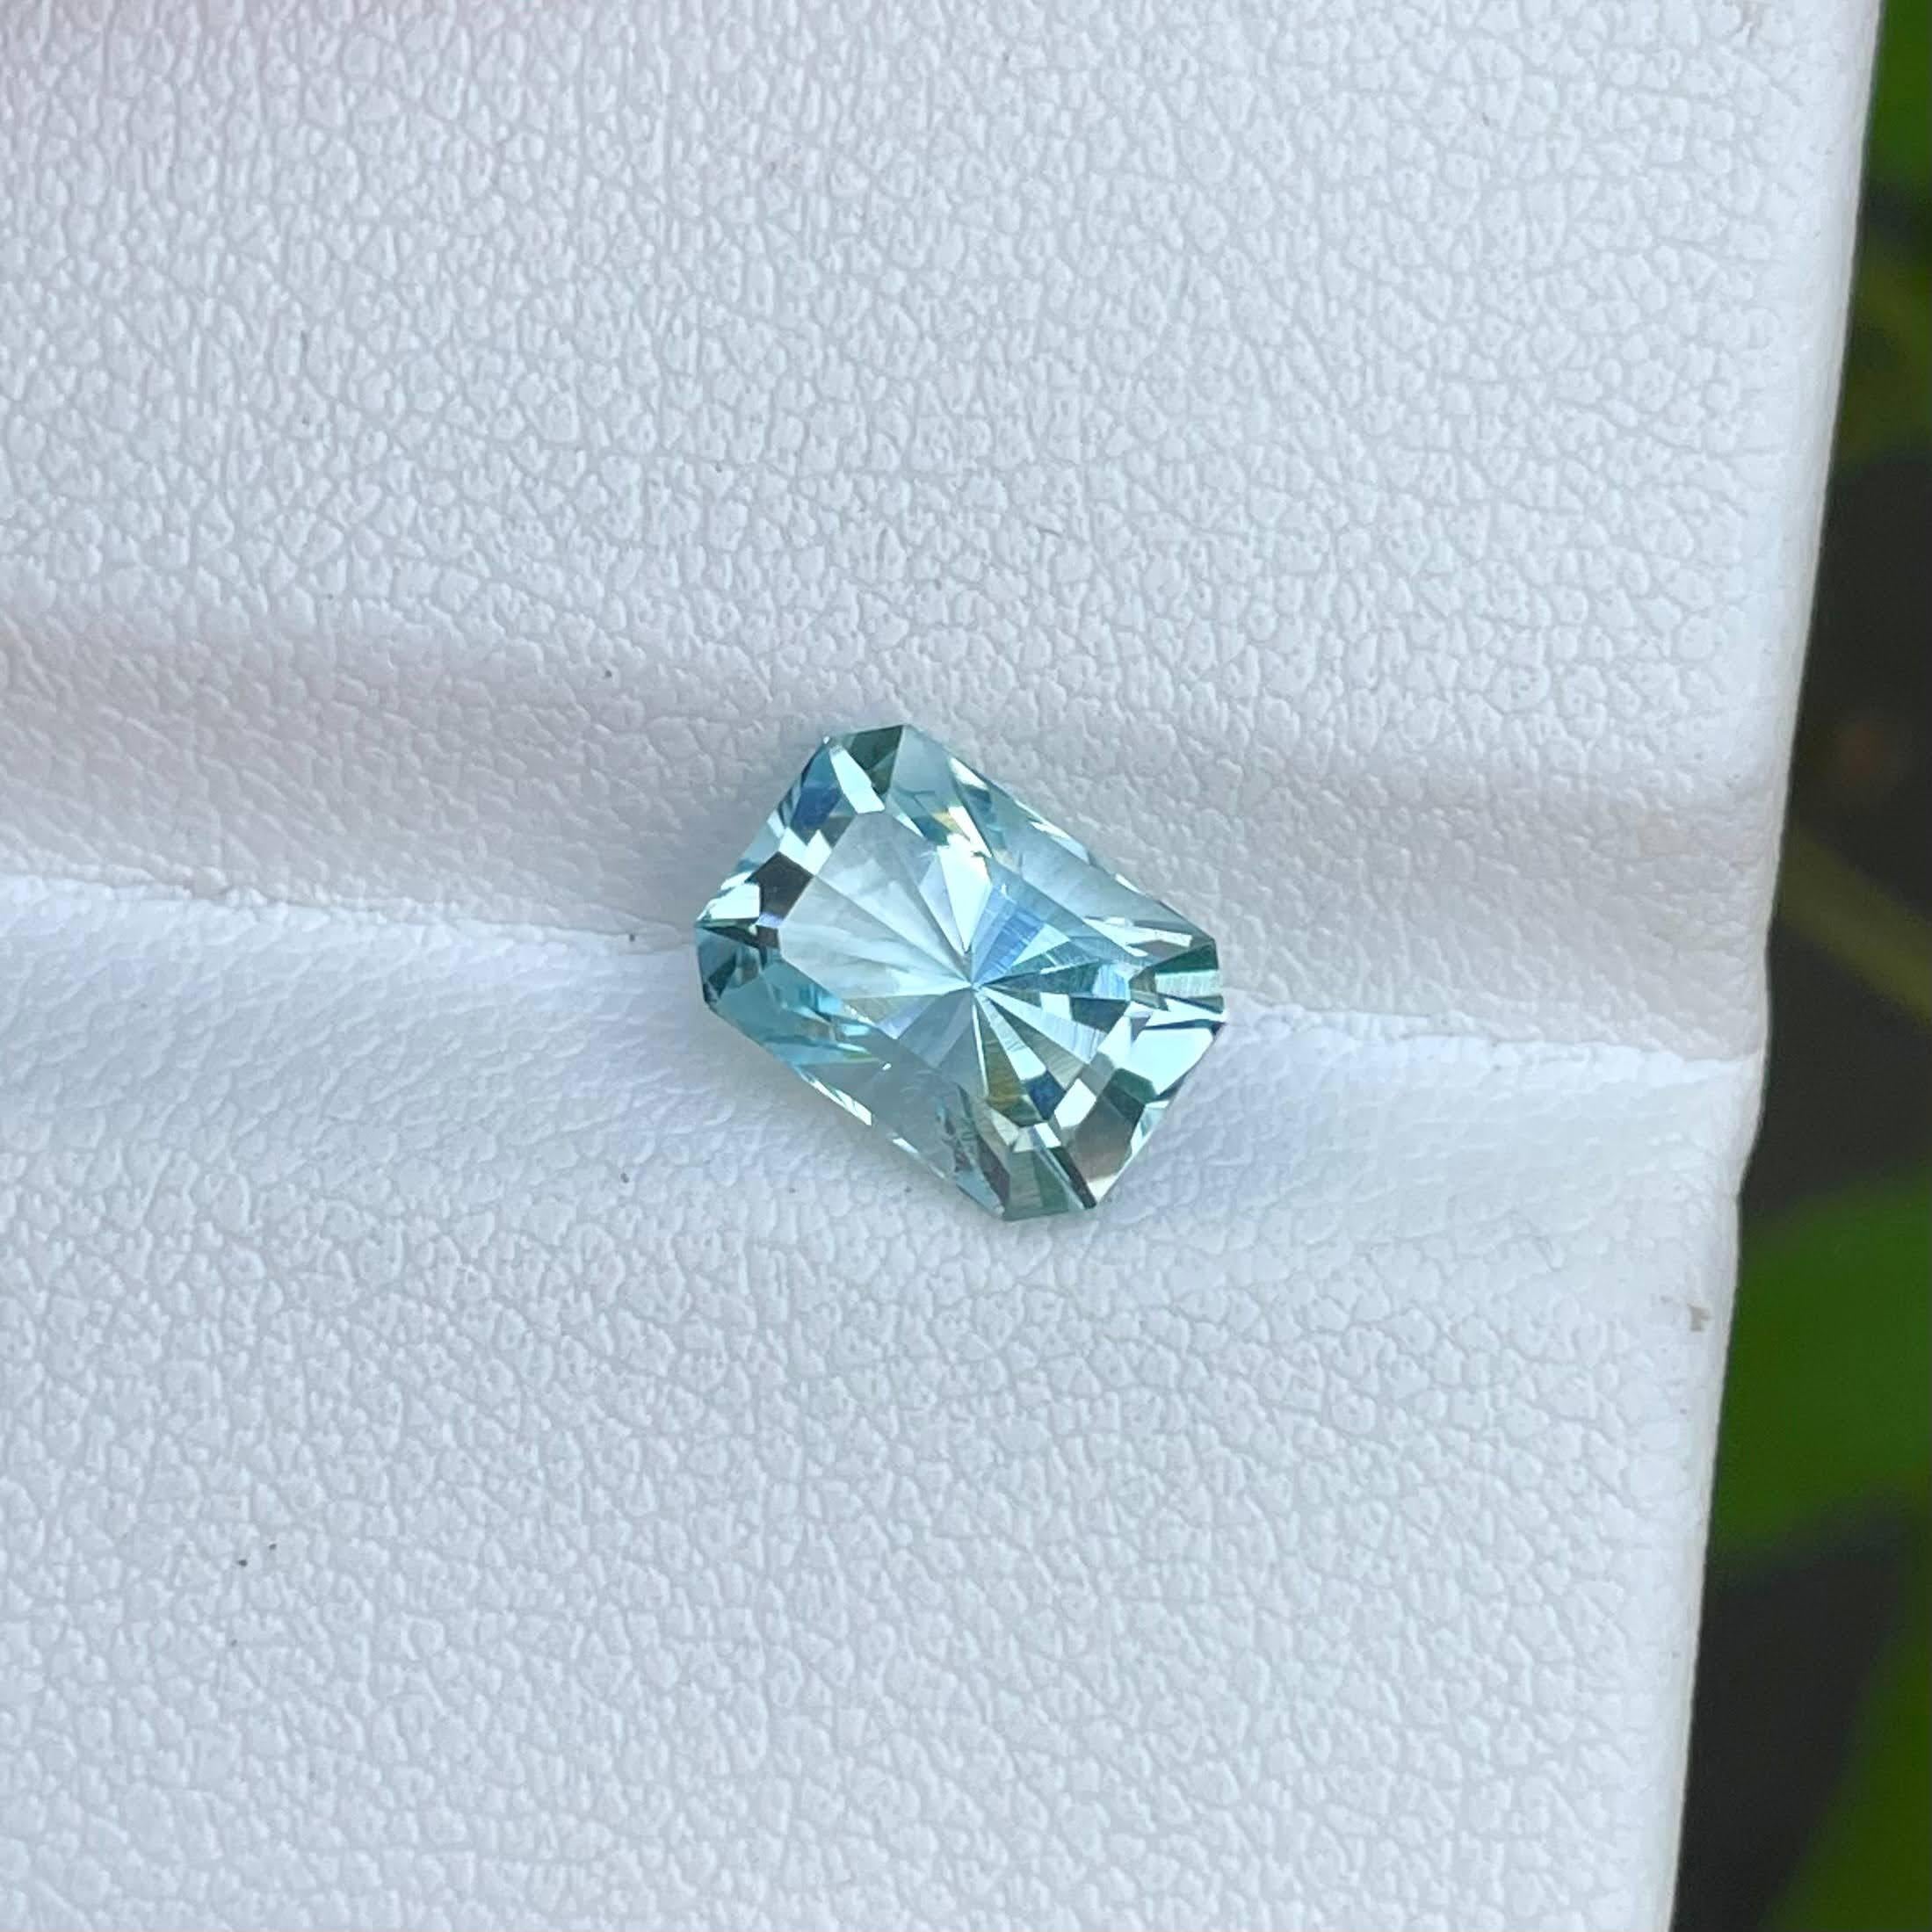 Weight 1.90 carats 
Dim 8.8x6.2x5.5 mm
Clarity Eye Clean
Treatment None
Origin Madagascar
Shape Octagon
Cut Radiant




A resplendent 1.90-carat Blue Aquamarine takes center stage with its radiant cut, showcasing the impeccable craftsmanship of